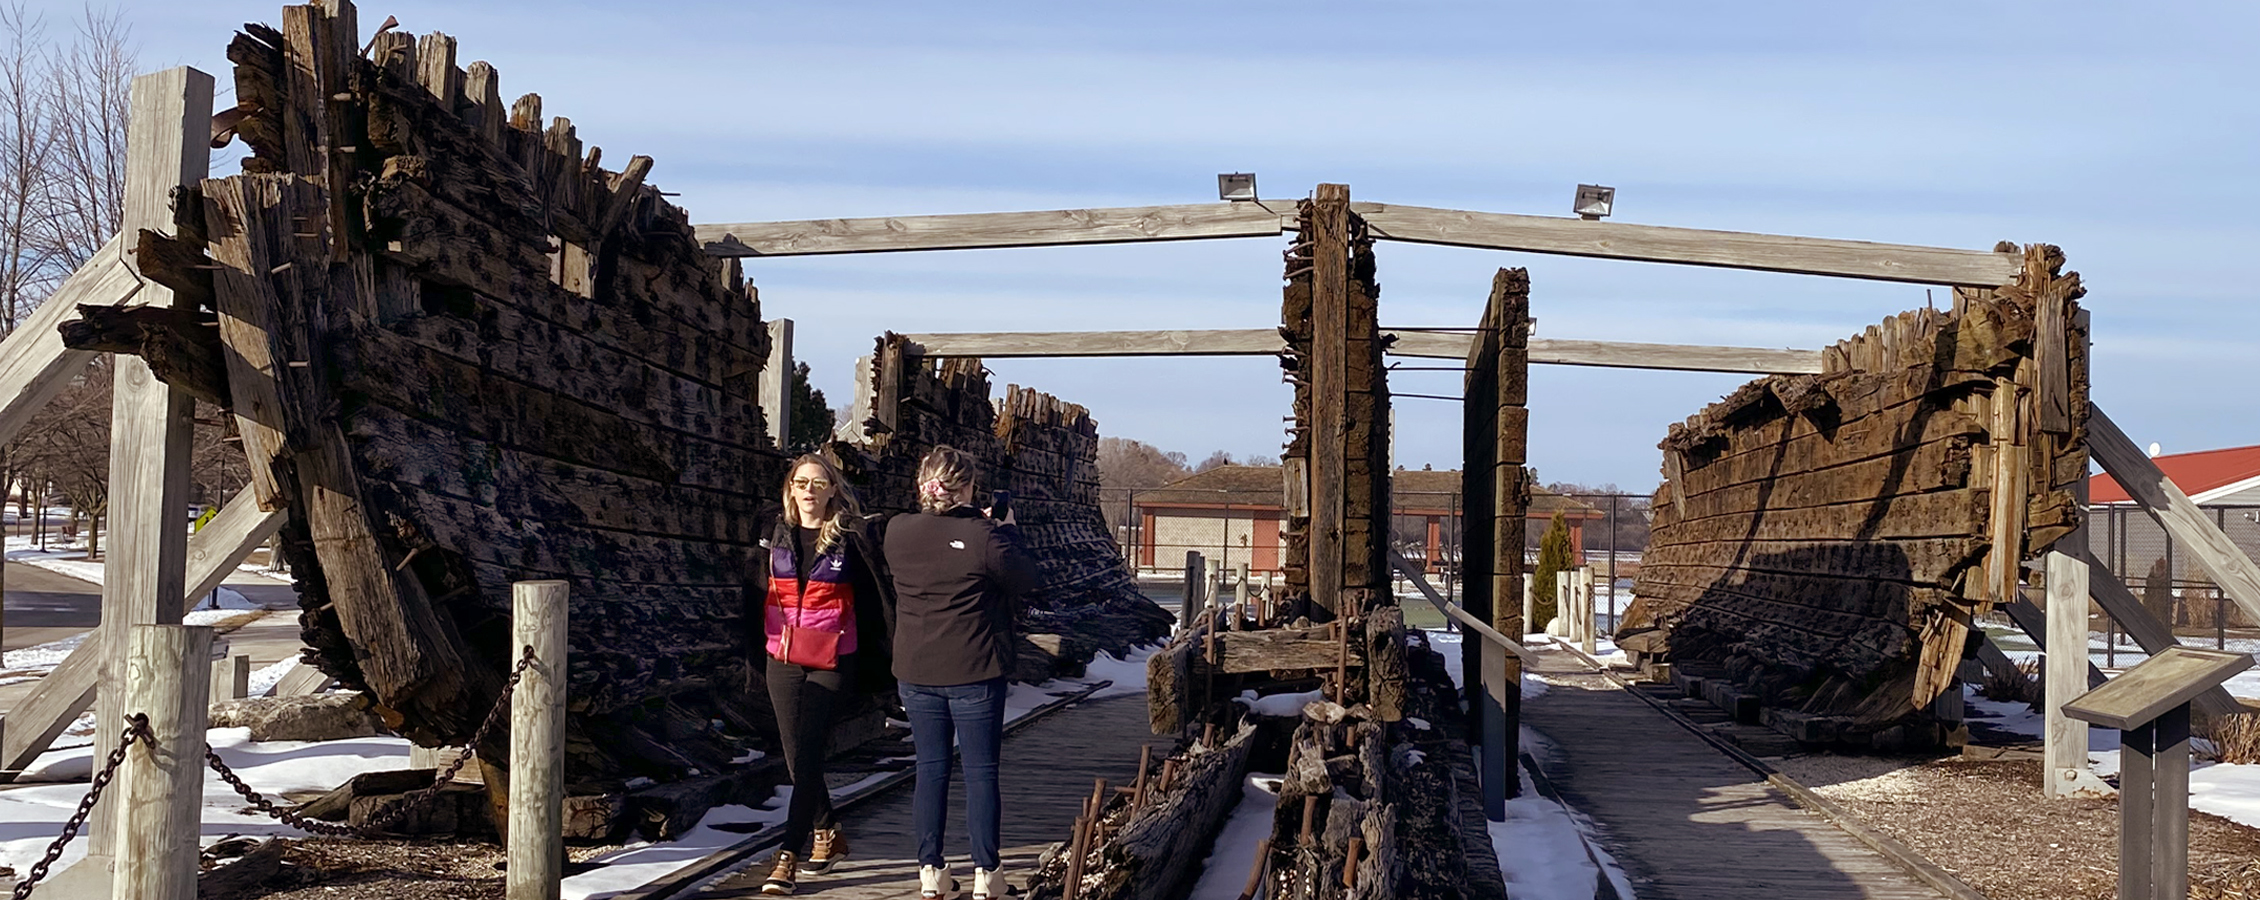 Students walk through remains of an old, large wooden boat.